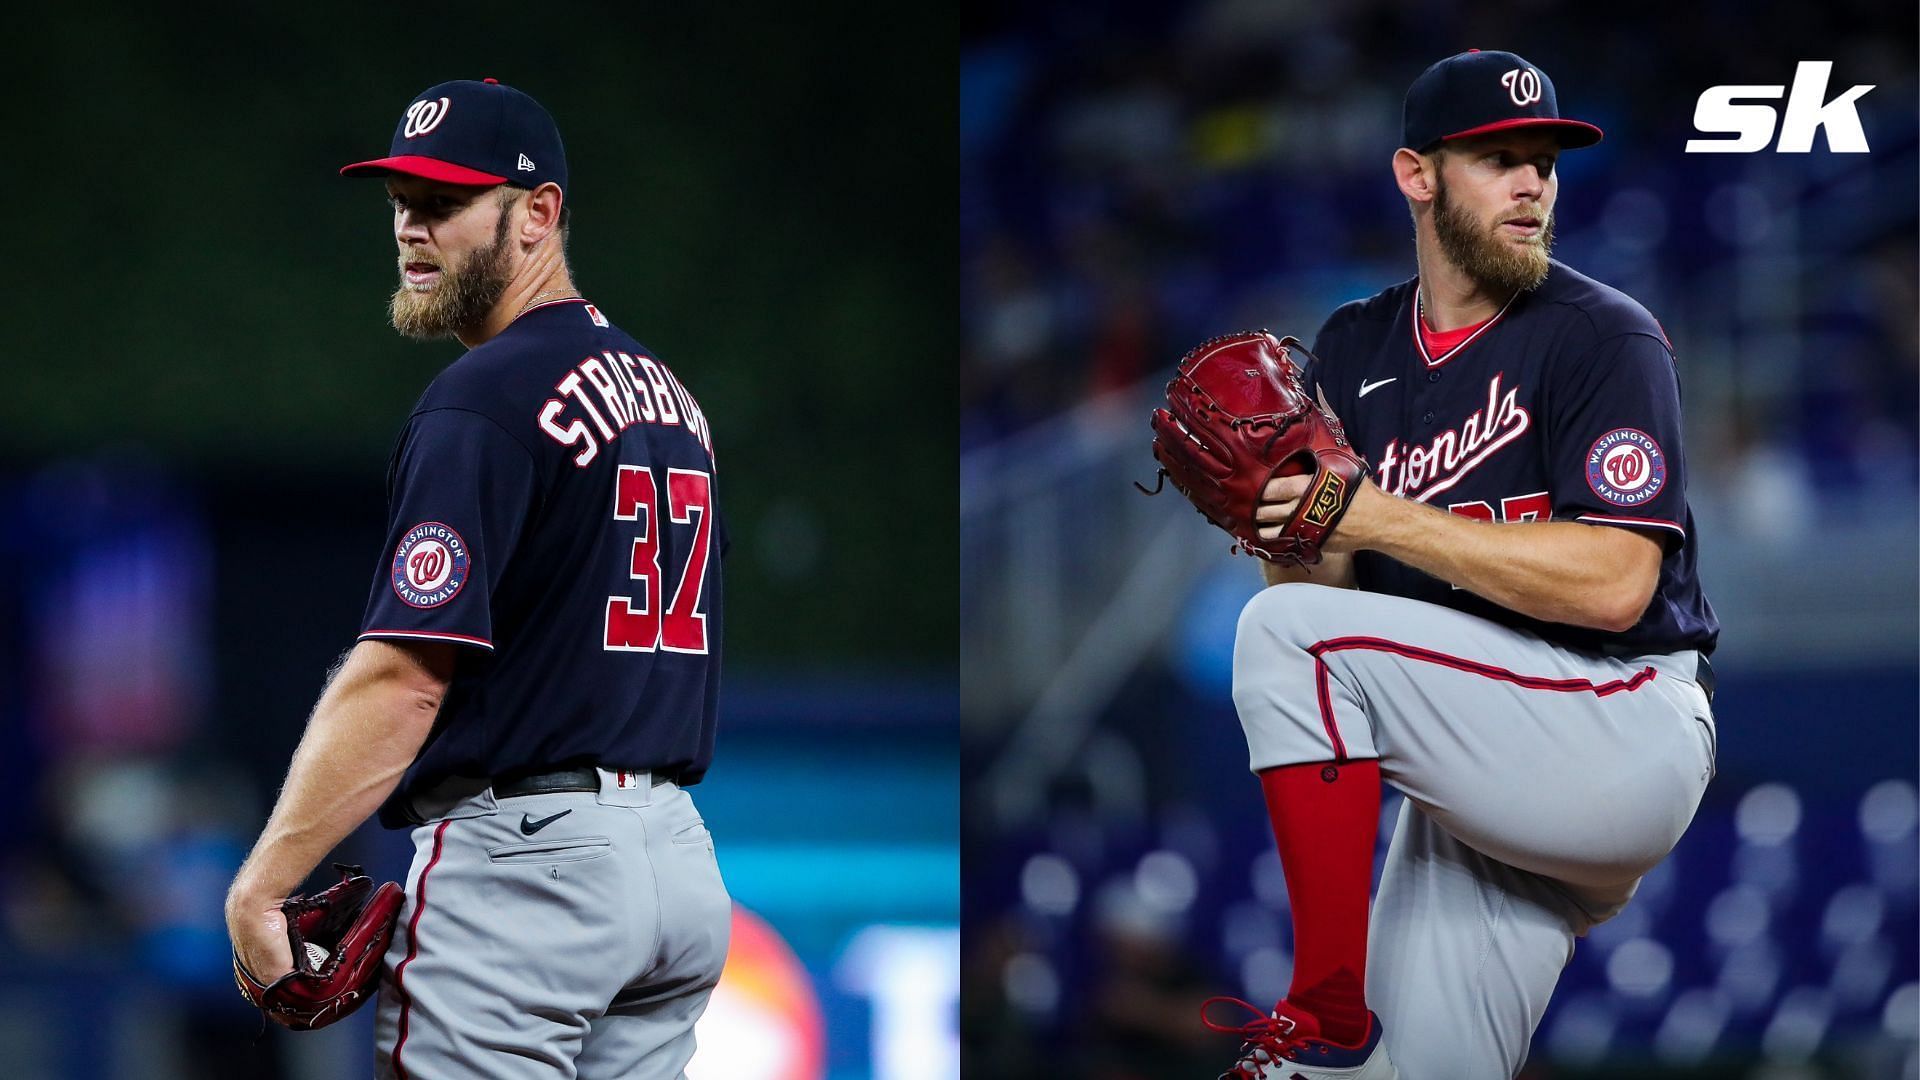 Stephen Strasburg enjoyed a successful and lucrative career in the MLB, earning over $350 million